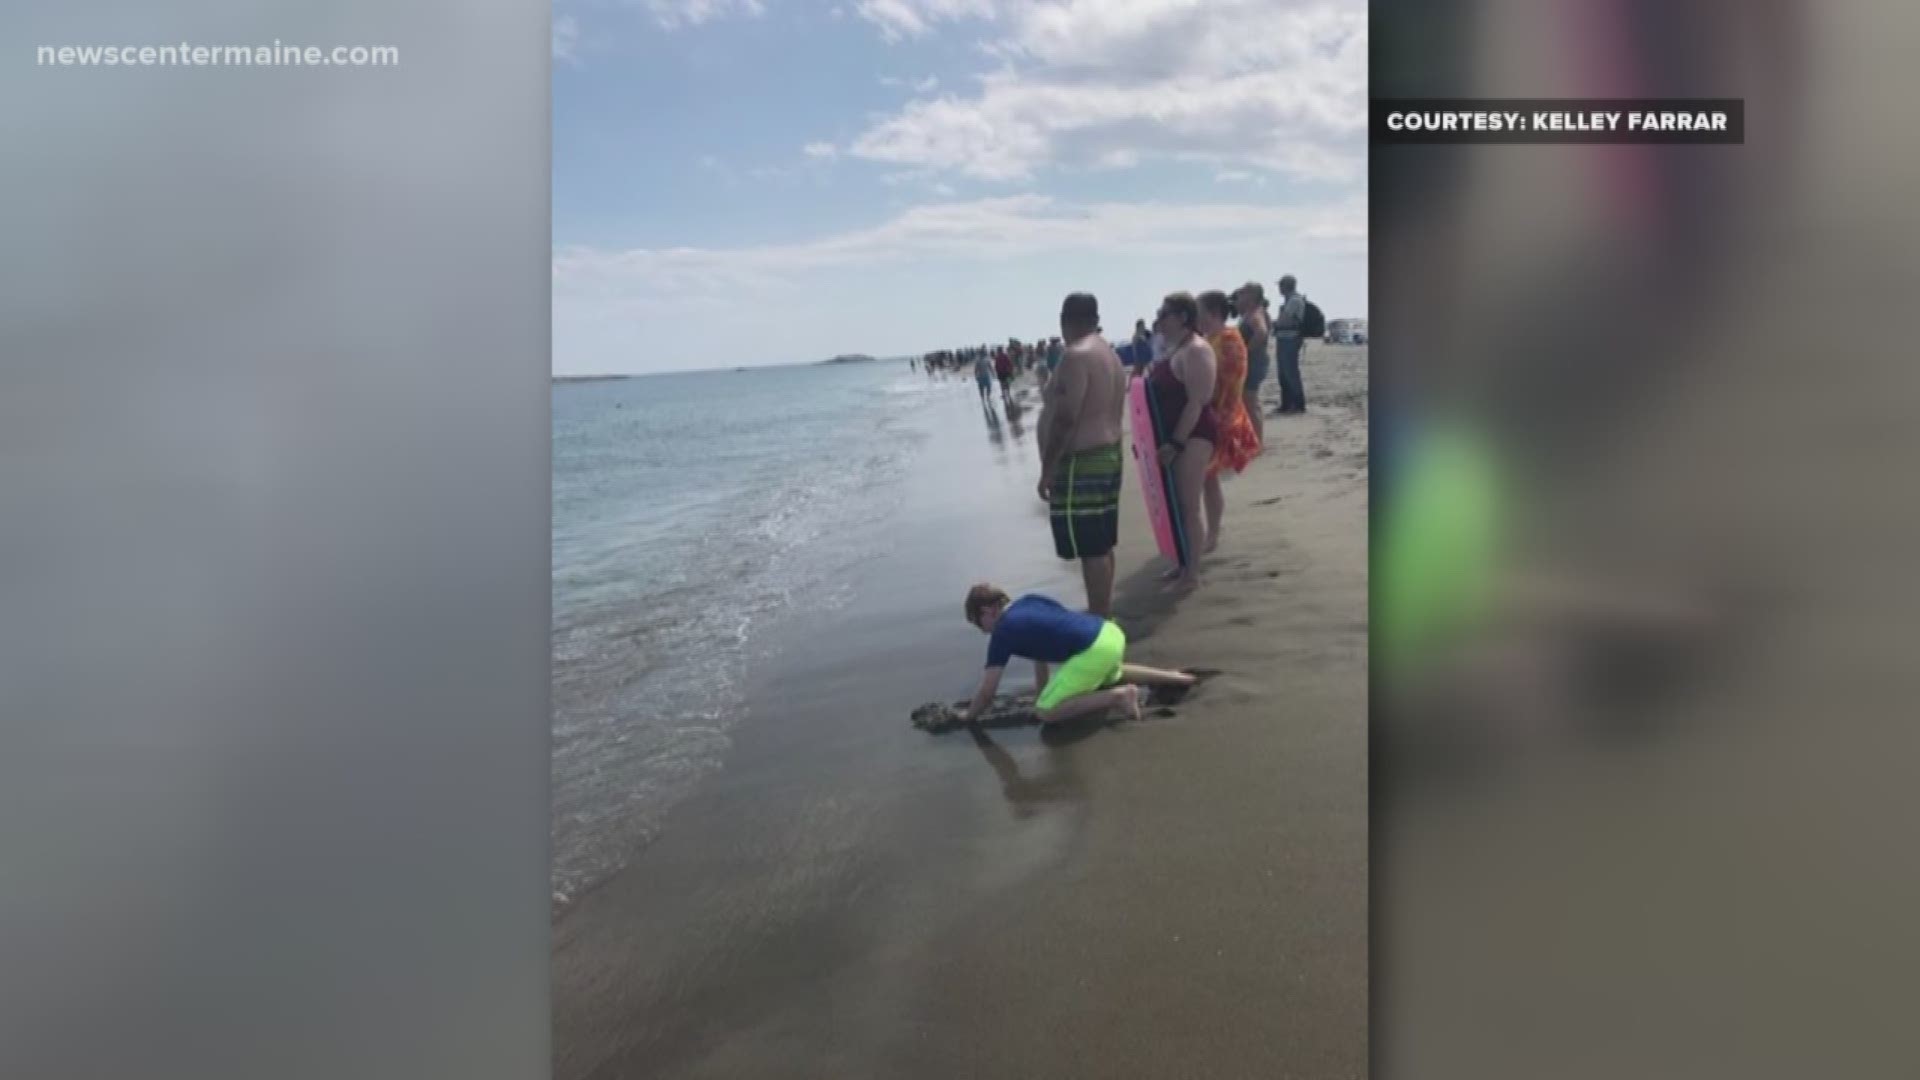 Beach-goers in Maine were evacuated from the water at Popham Beach after a possible shark sighting.